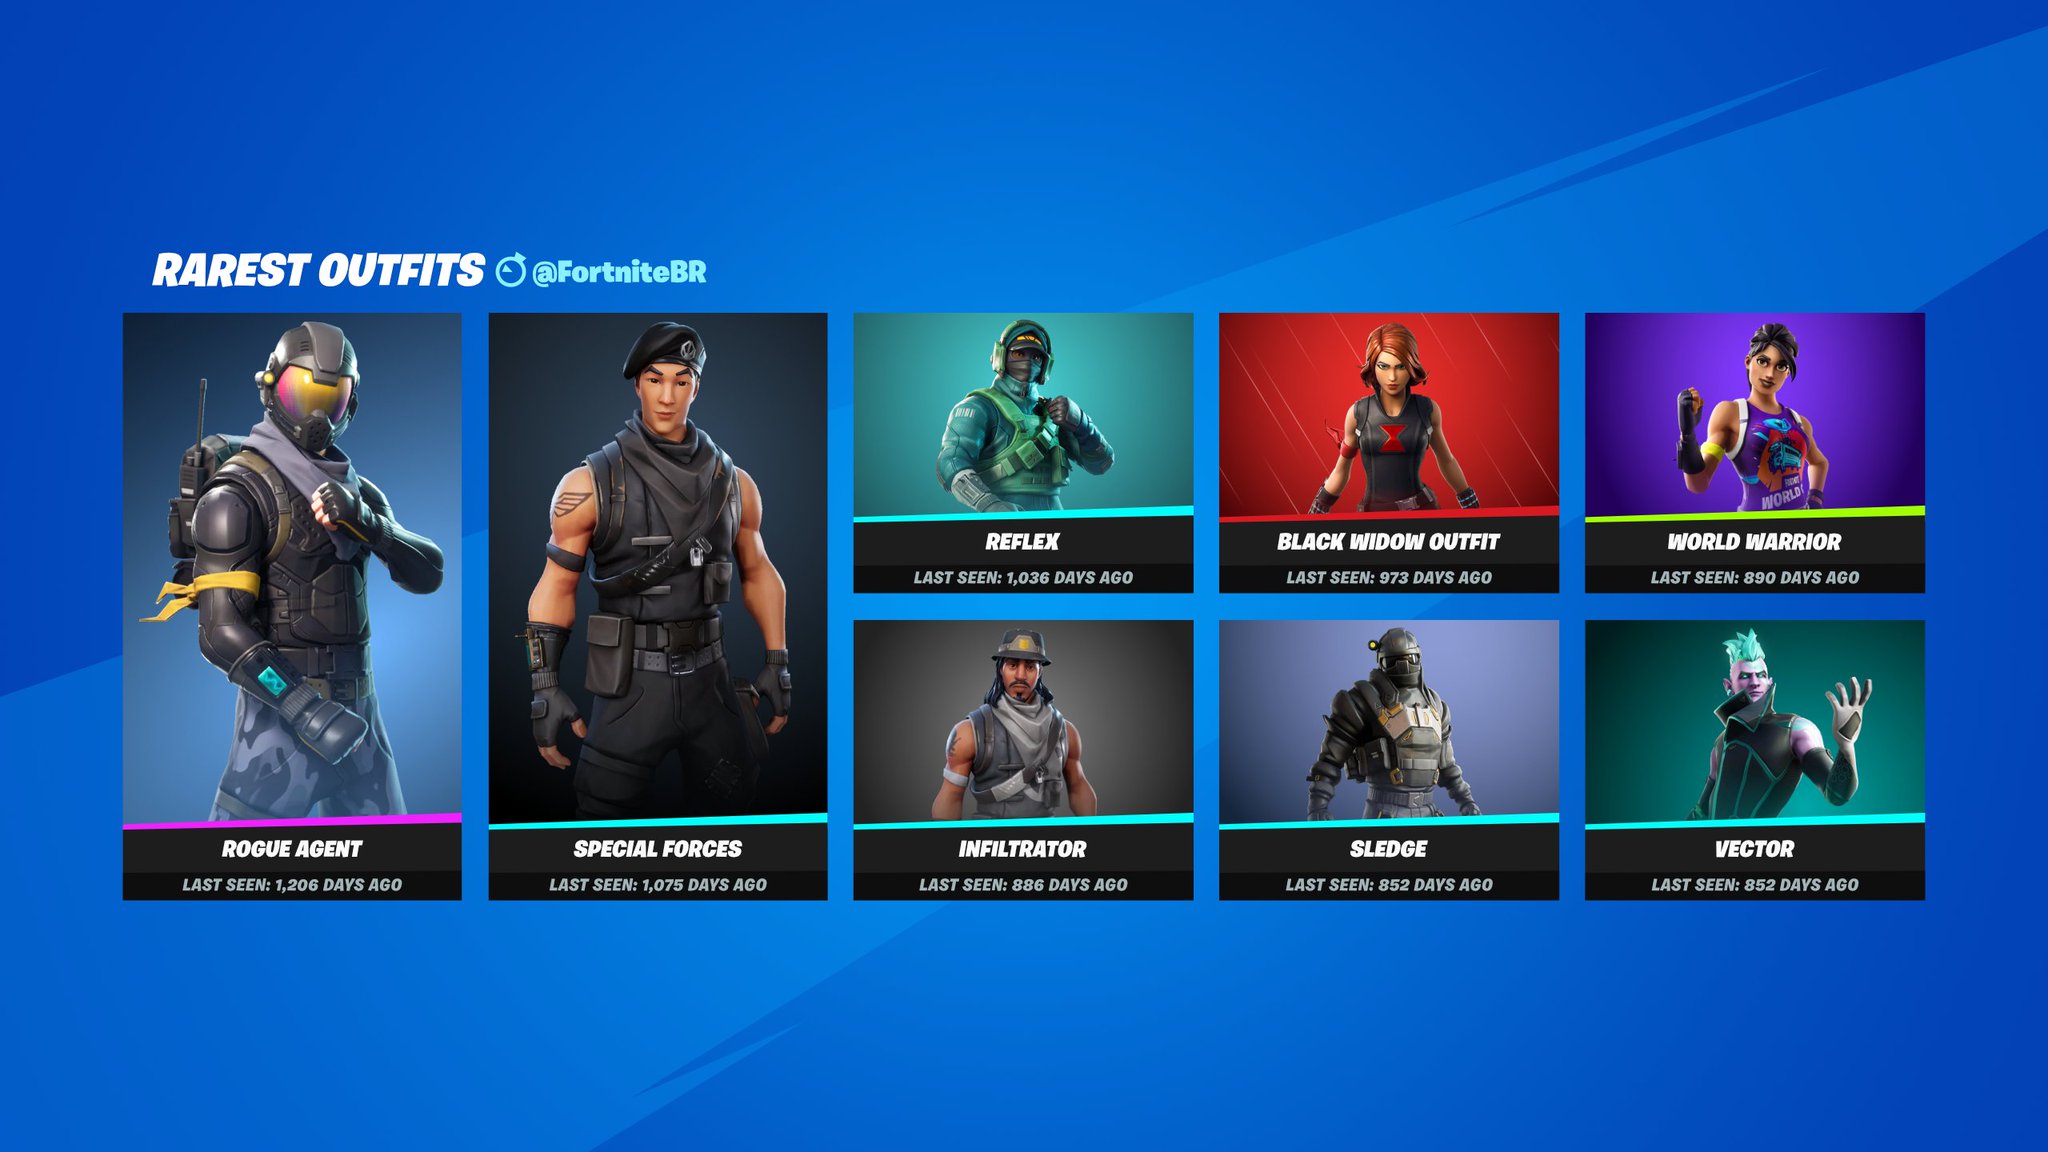 Forstad Plateau krog Fortnite News on Twitter: "Rarest Item Shop Outfits! 🛒 Which do you own? # Fortnite https://t.co/knWwRZO7nk" / Twitter